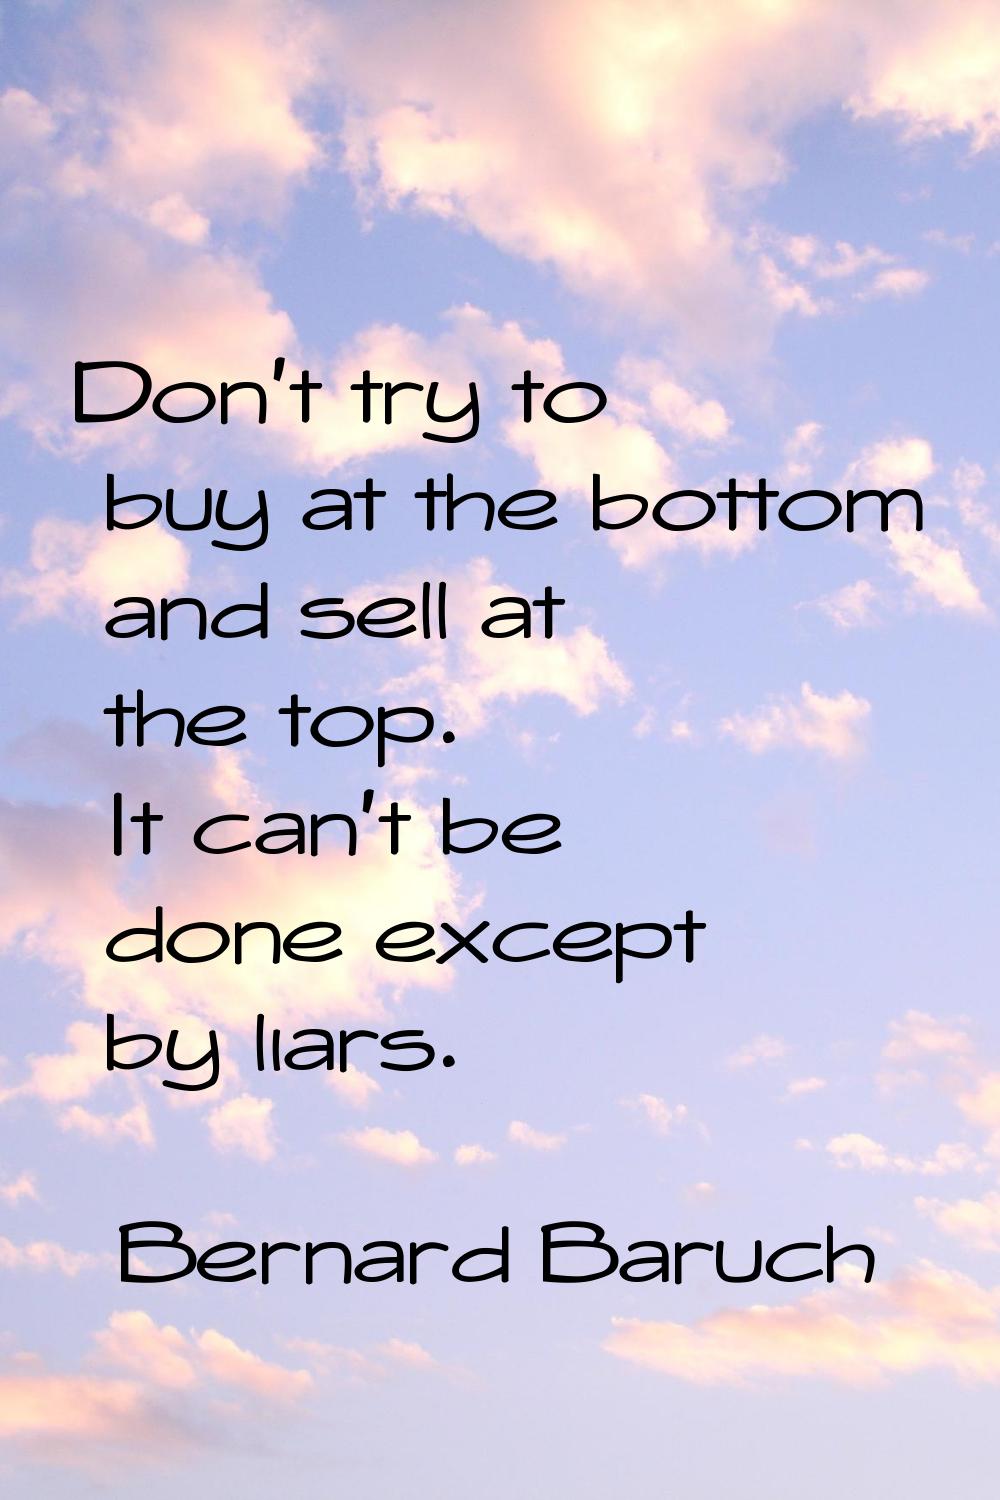 Don't try to buy at the bottom and sell at the top. It can't be done except by liars.